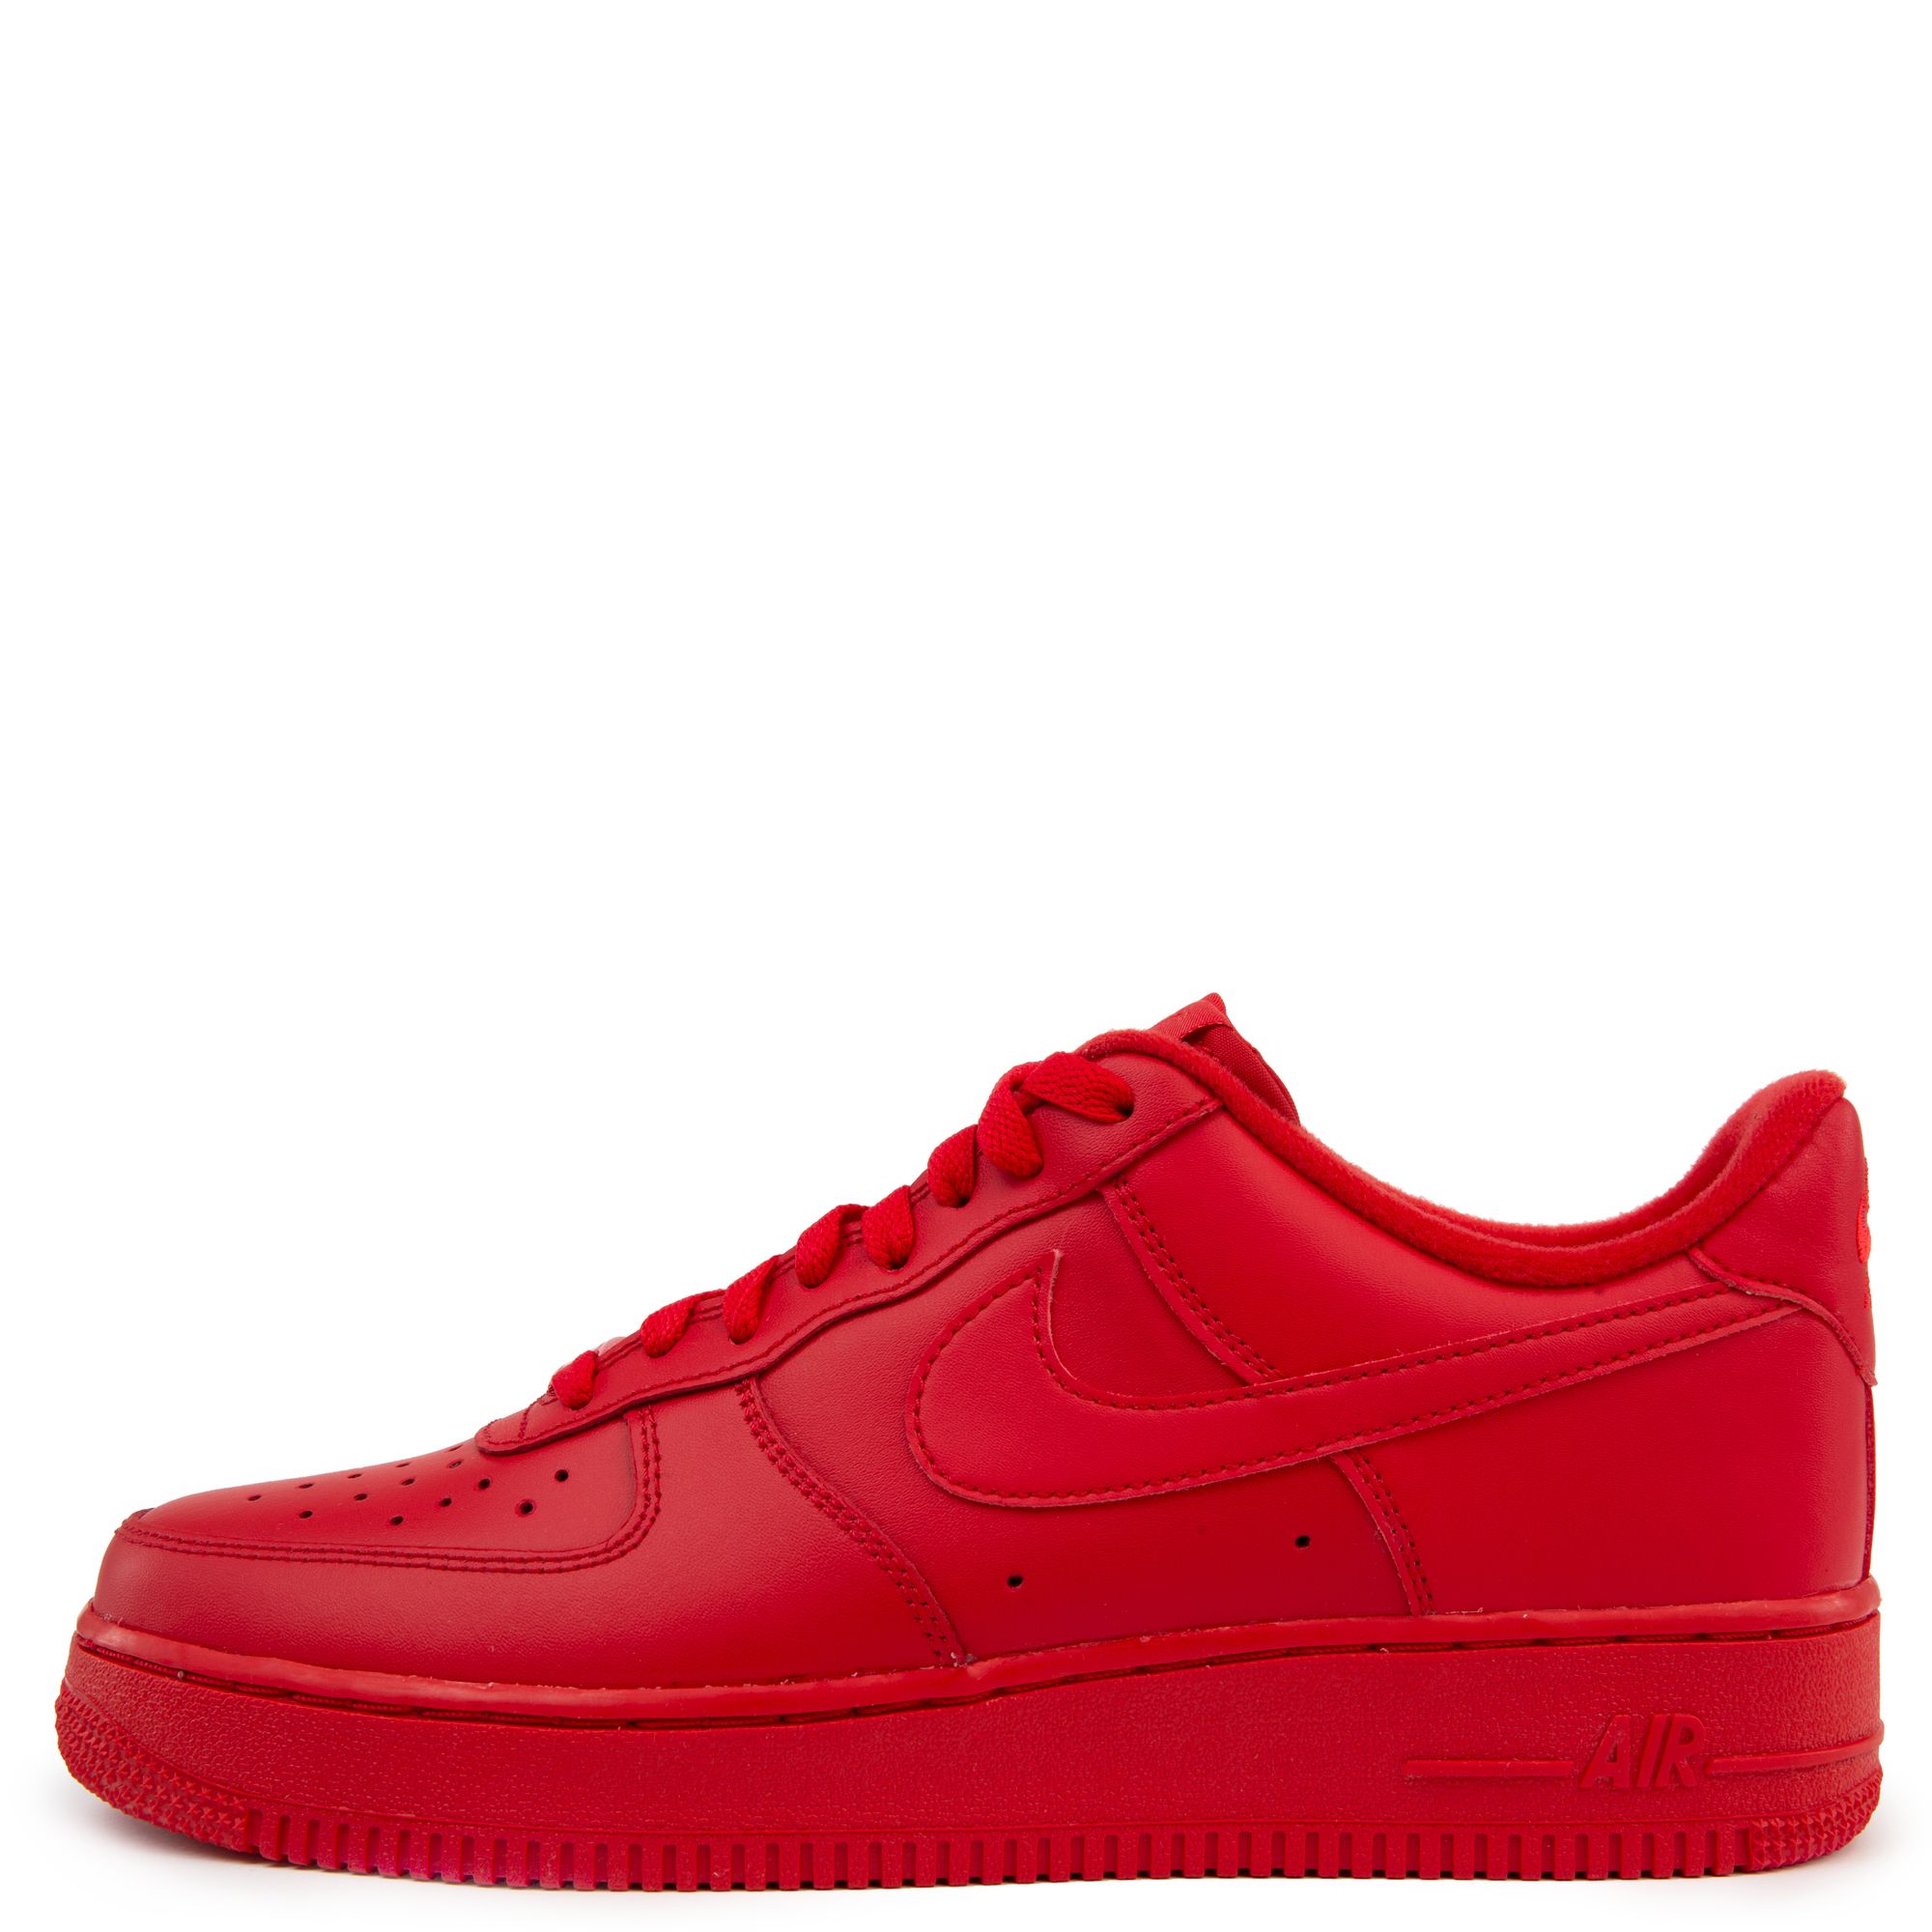 nike air force 1 '07 lv8 mid sneakers in red and black